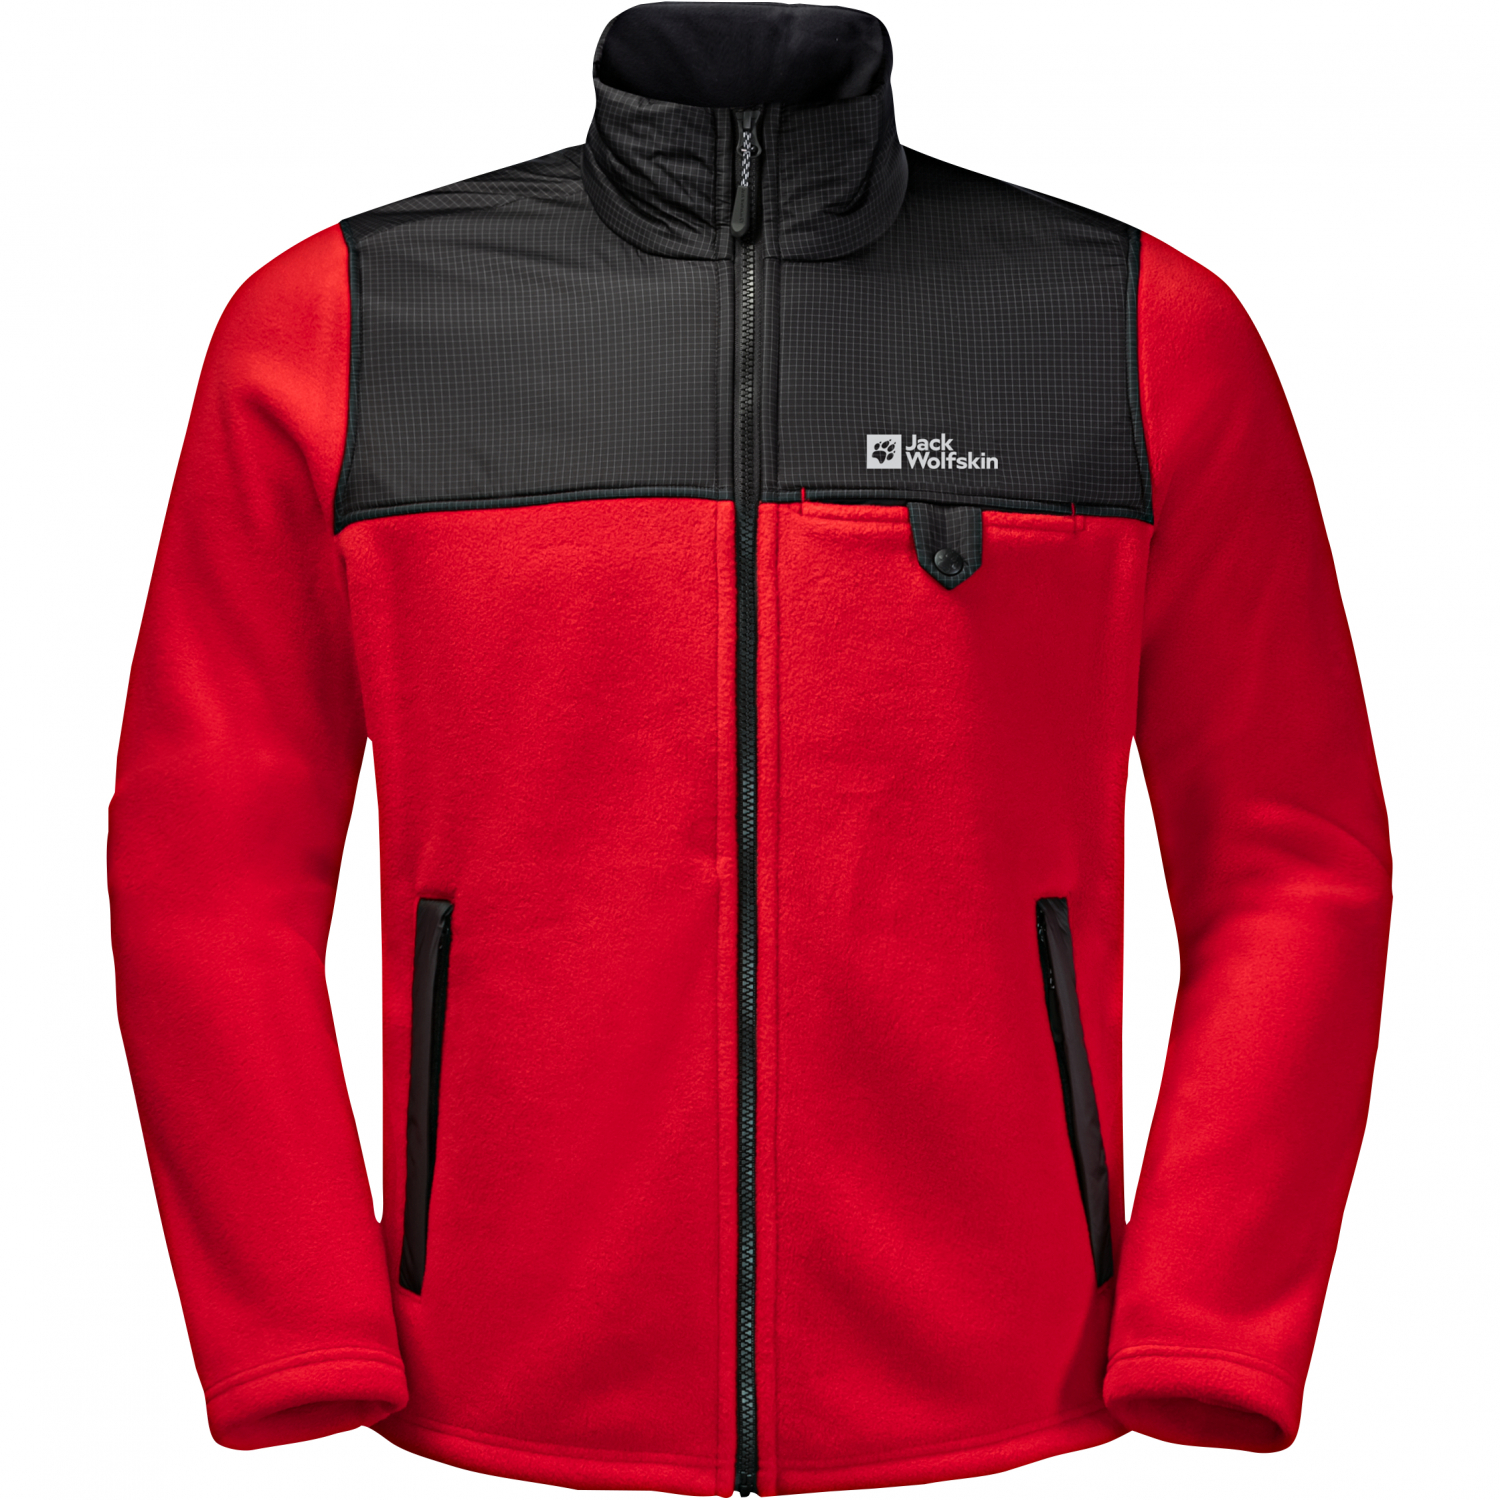 Jack Wolfskin fleece | Shop at low jacket DNA Fishing Grizzly (red/black) prices Askari